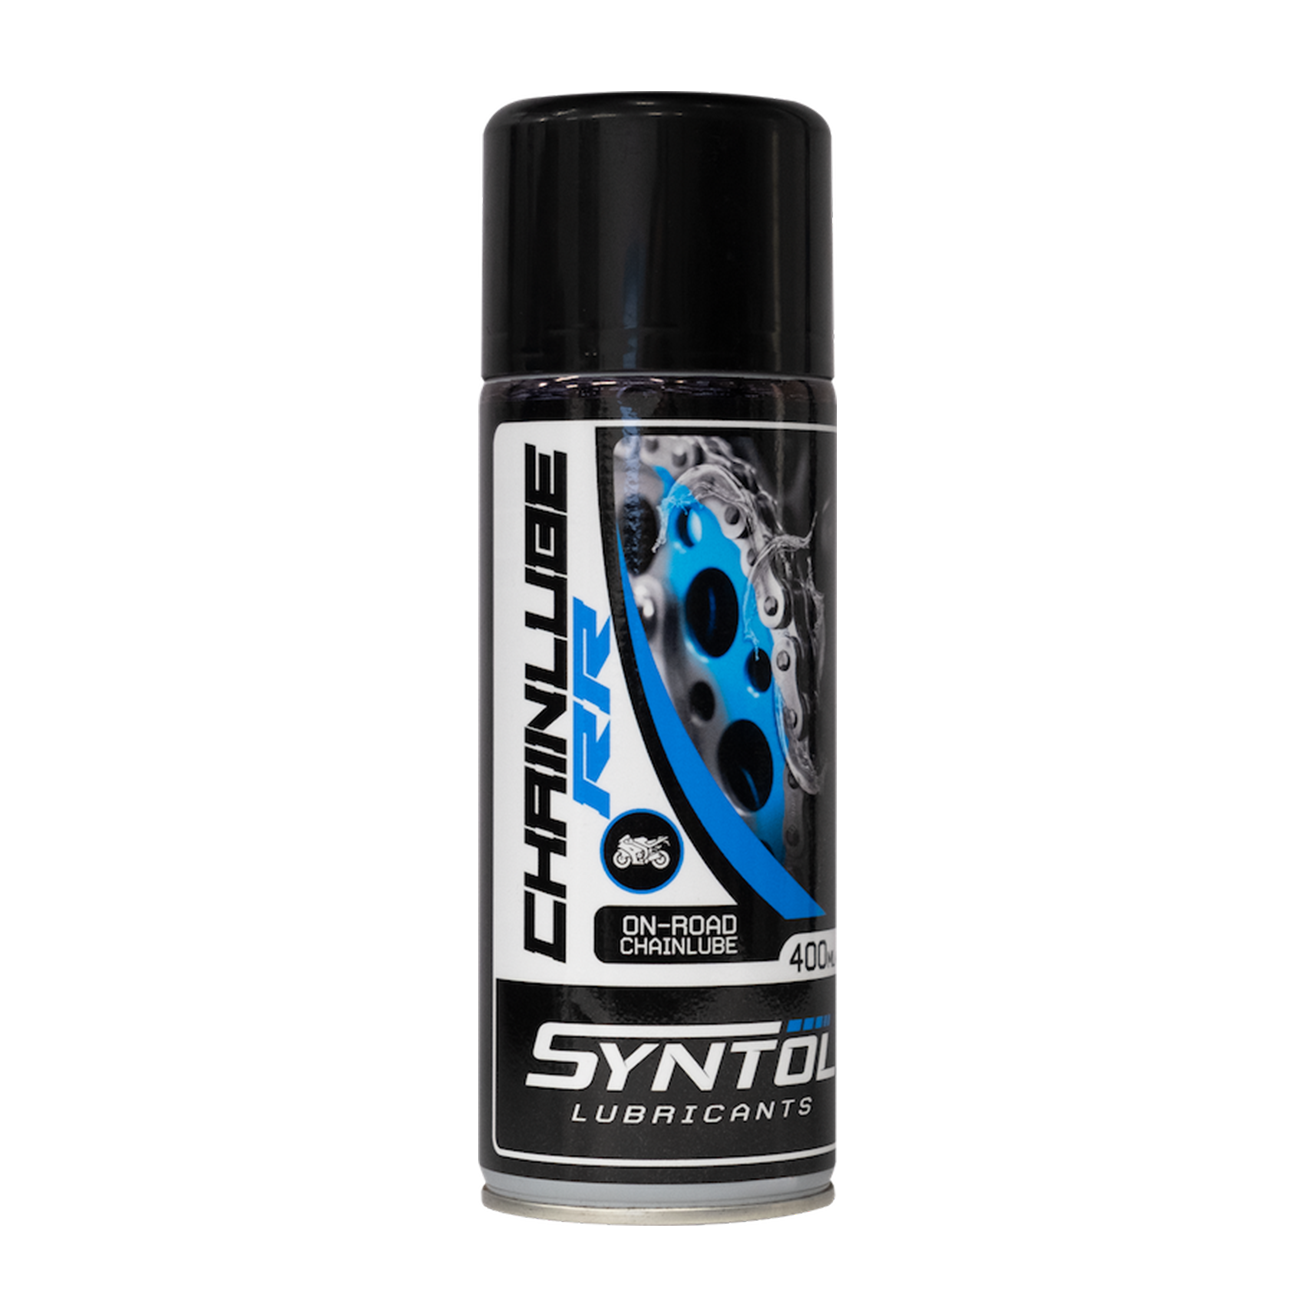 Syntol Chainlube-RR Aerosol - 400ML-F0091-400-Oils and Lubricants-Pyramid Motorcycle Accessories